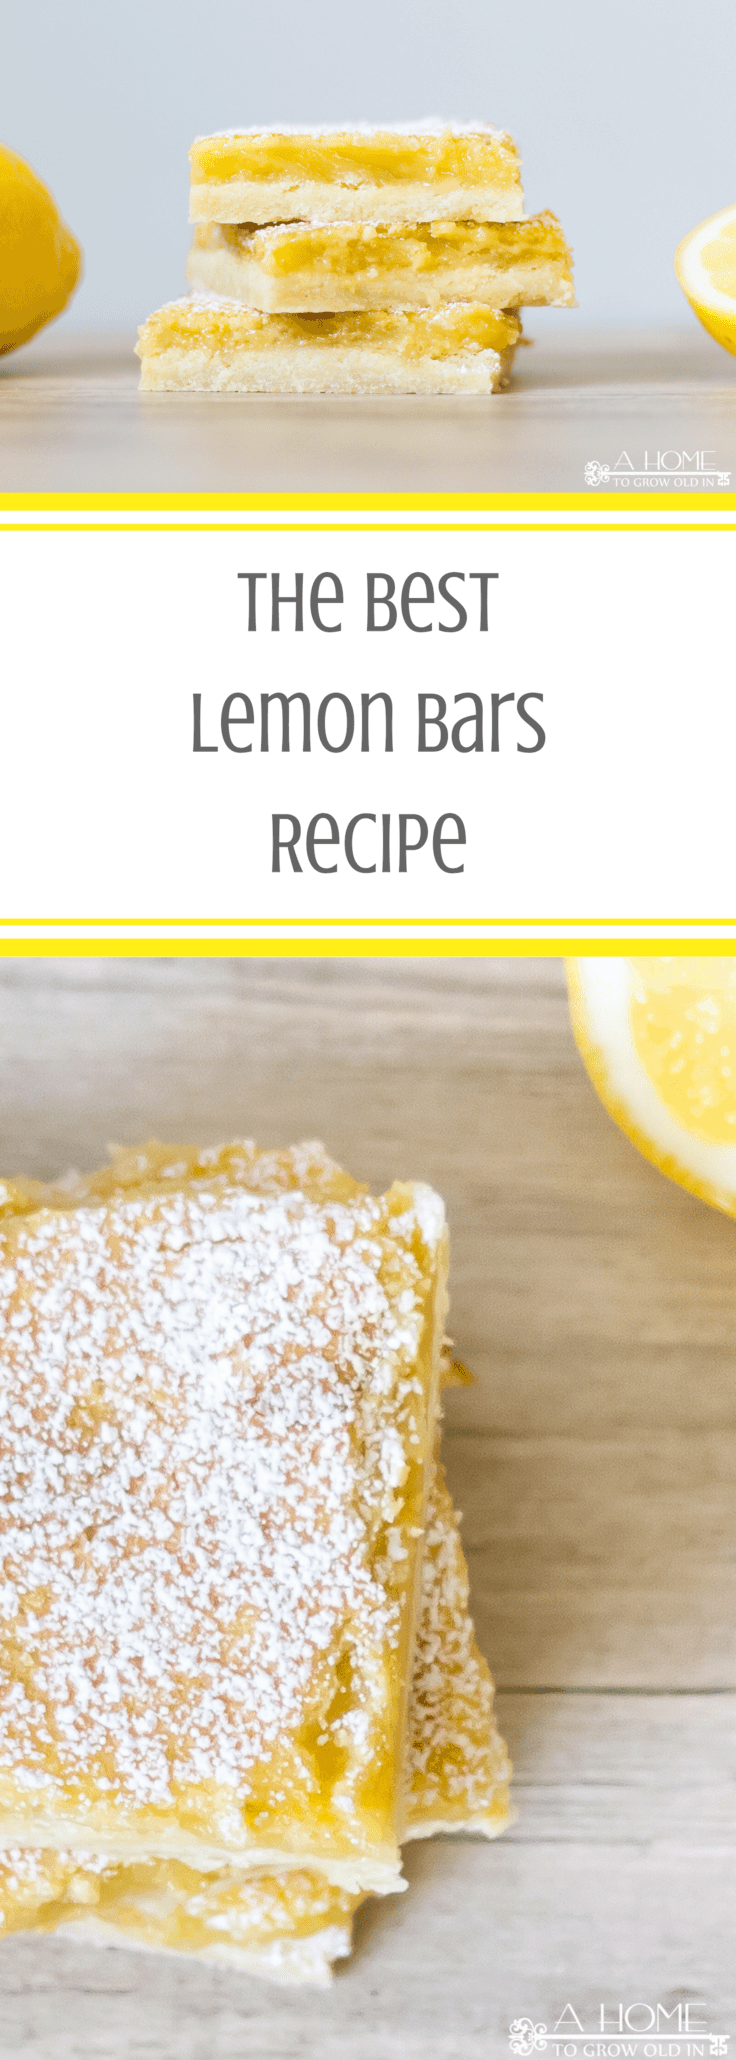 This irresistible lemon bars recipe balances sweet with tartness by combining the perfect shortbread crust with a delicious lemon custard. This easy summer dessert will be the best treat at your next summer BBQ or get-together! #lemonbars #dessert #kenarry